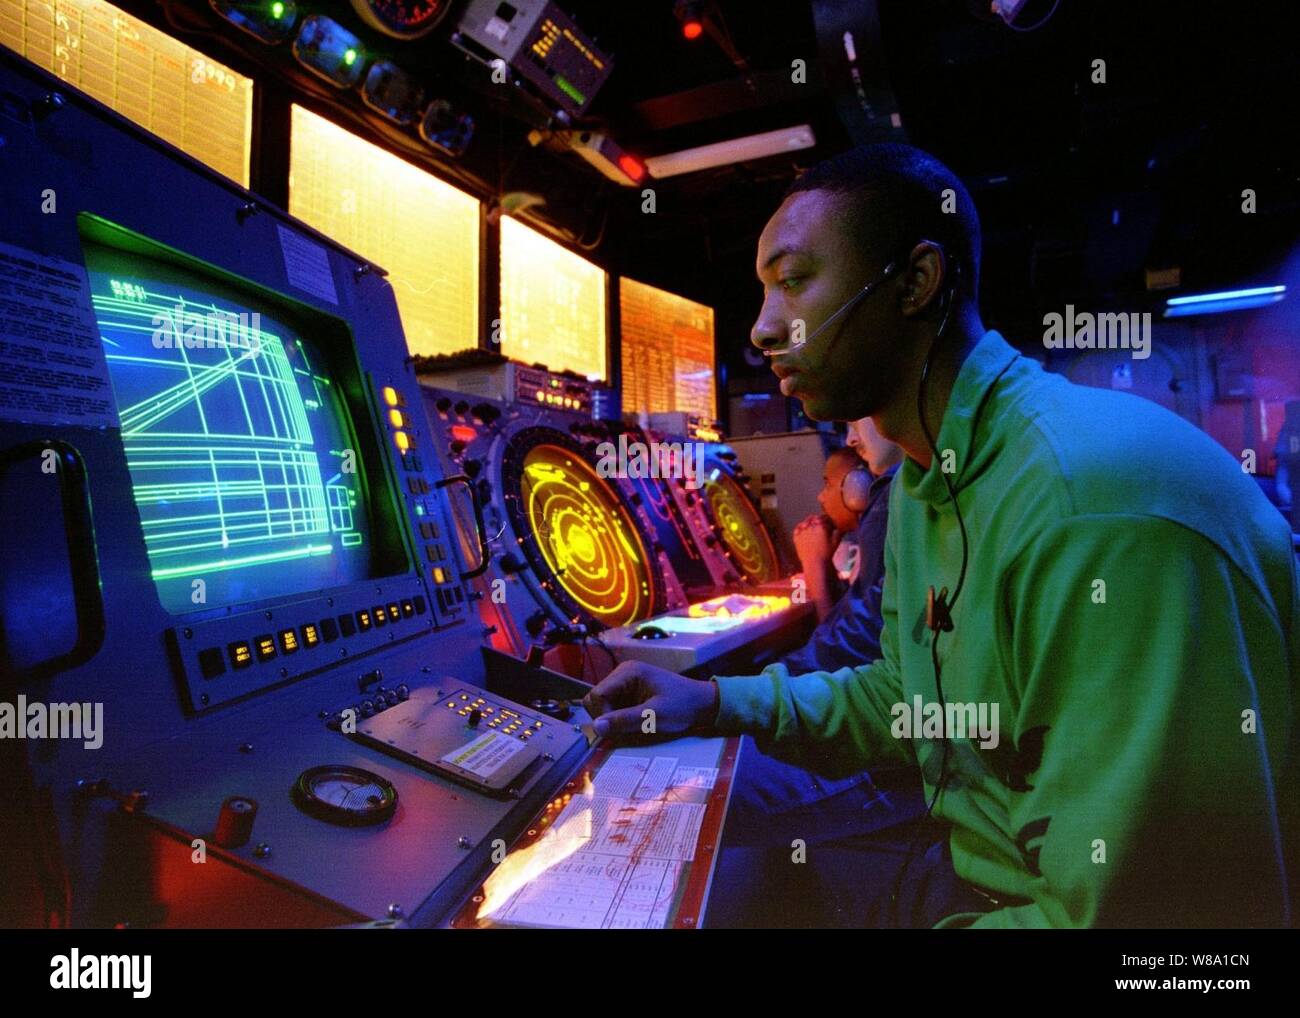 Petty Officer 2nd Class Buccie Cline, a Navy air traffic controlman, monitors final control positions of pilots during flight operations from the aircraft carrier USS Nimitz (CVN 68) on Nov. 16, 1997.  The Nimitz and embarked Carrier Air Wing 9 are operating in the Persian Gulf in support of Operation Southern Watch which is the U.S. and coalition enforcement of the no-fly-zone over Southern Iraq. Cline is from Humphrey, Ariz. Stock Photo